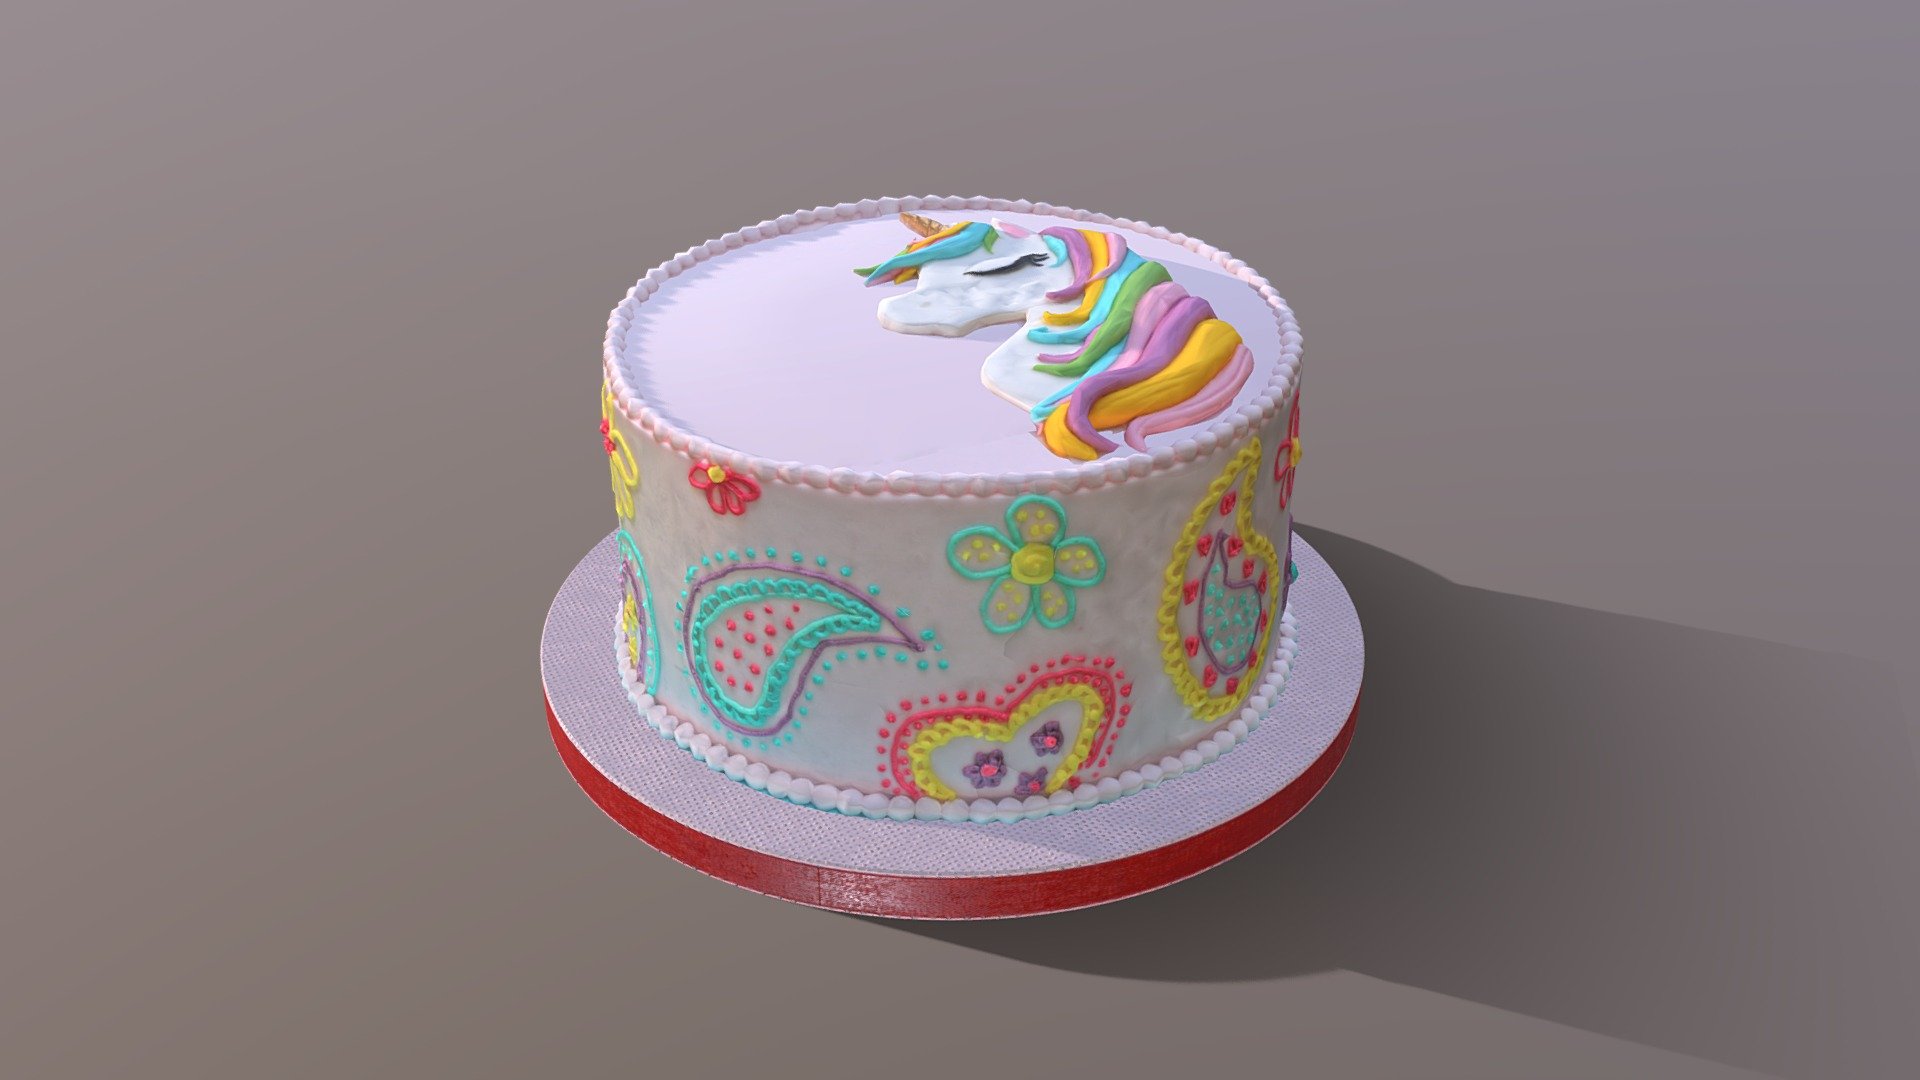 3D scan of a lovely Unicorn Buttercream Paisley Cake which is made by CAKESBURG Online Premium Cake Shop in UK. You can also order real cake from this link: https://cakesburg.co.uk/products/unicorne-cake?_pos=13&amp;_sid=fb131cb81&amp;_ss=r

Textures 4096*4096px PBR photoscan-based materials Base Color, Normal, Roughness, Specular) - Unicorn Paisley Cake - Buy Royalty Free 3D model by Cakesburg Premium 3D Cake Shop (@Viscom_Cakesburg) 3d model